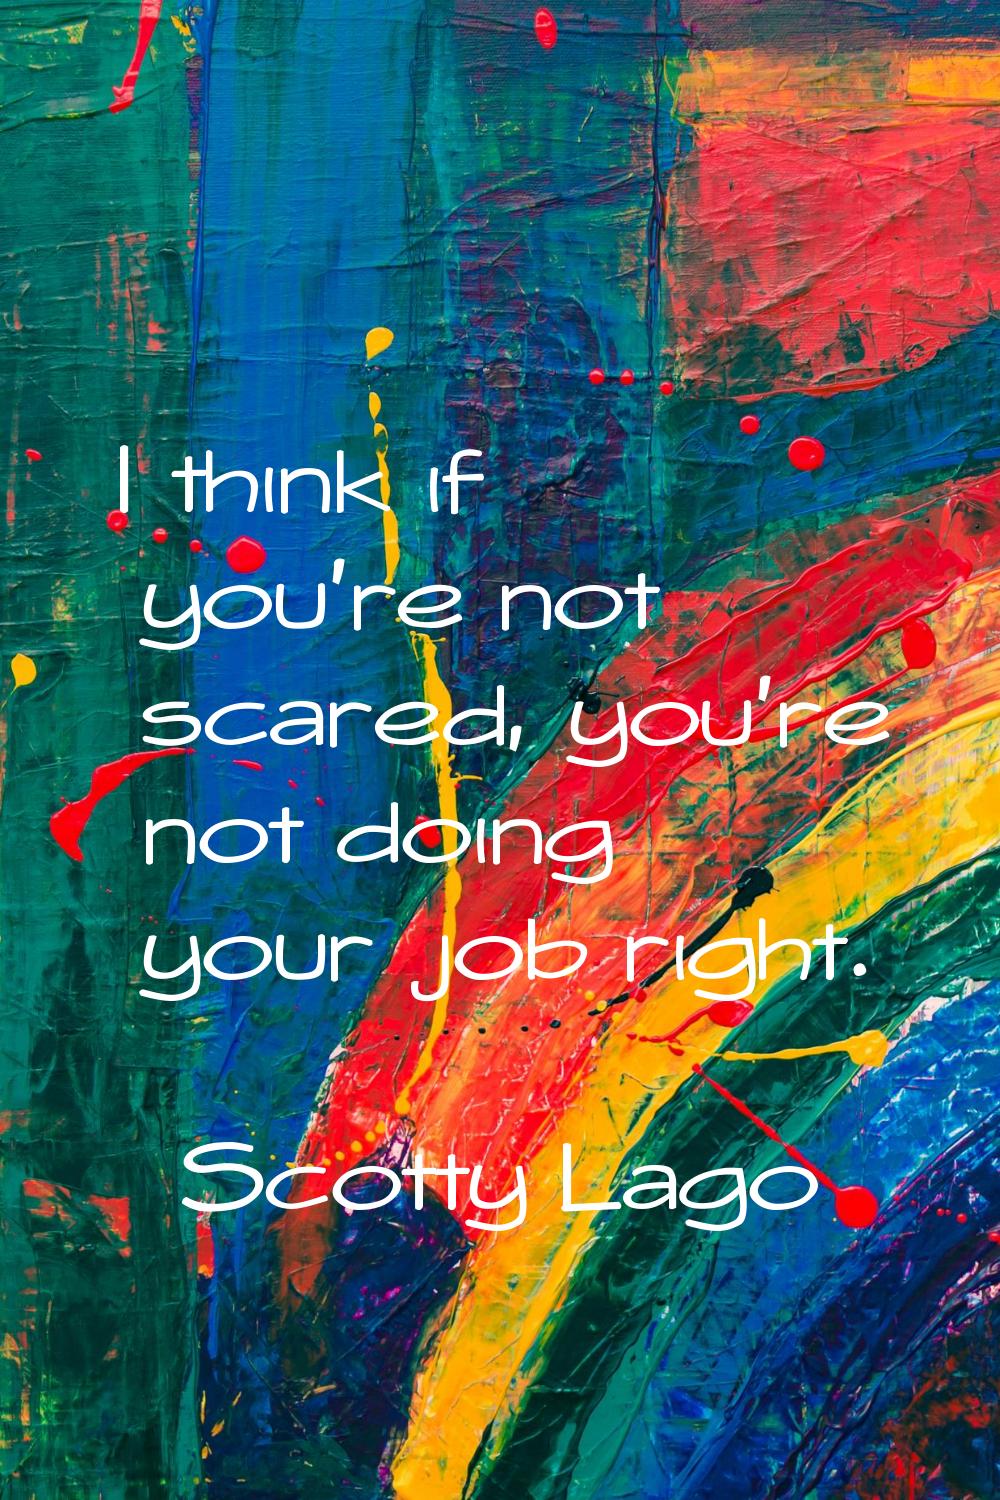 I think if you're not scared, you're not doing your job right.